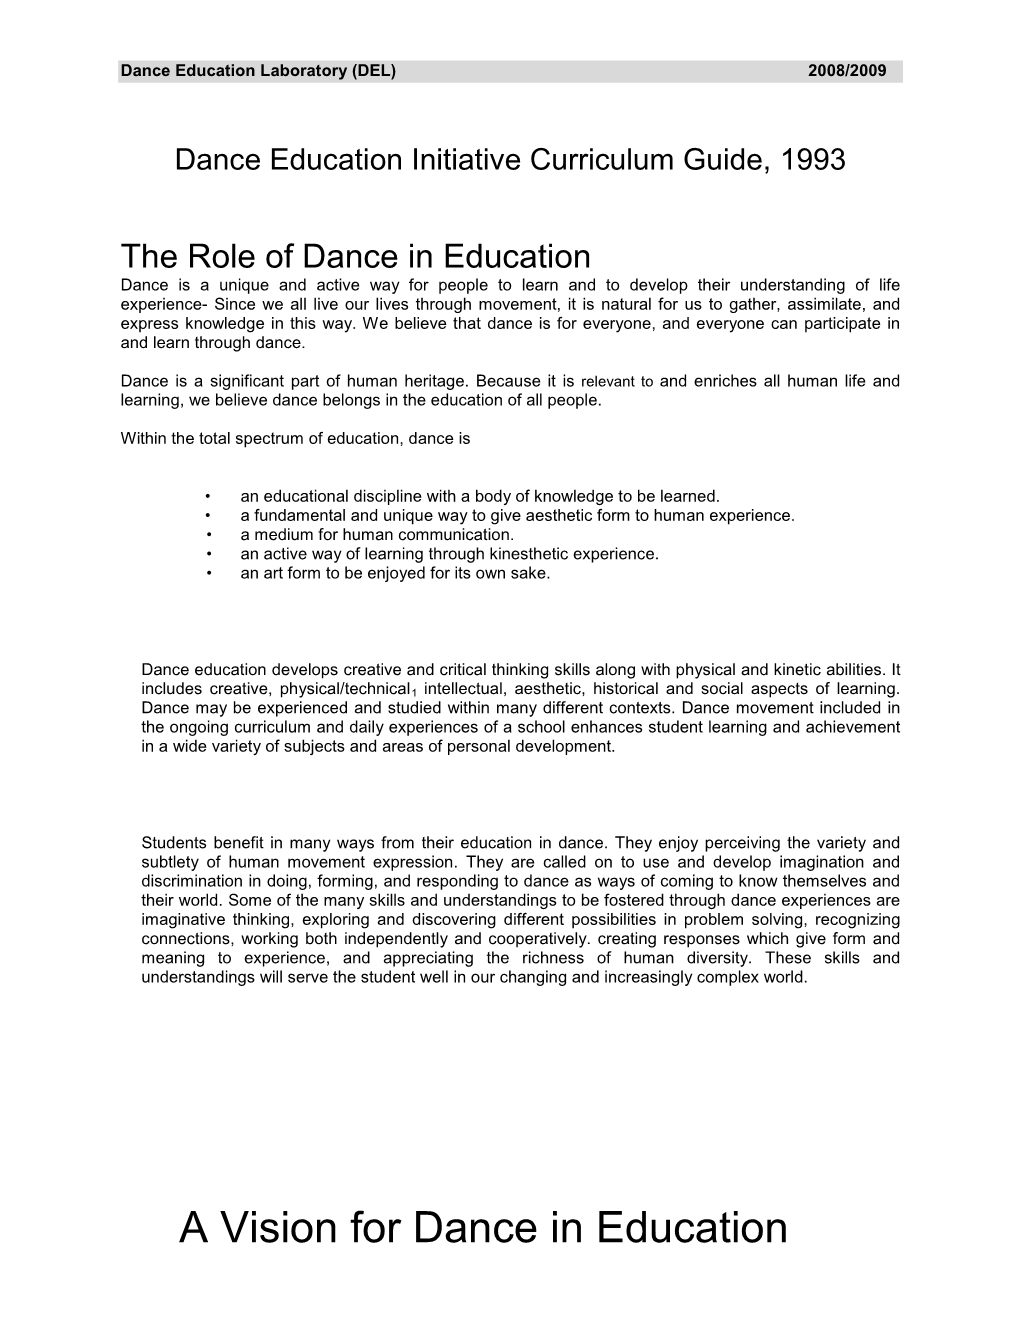 A Vision for Dance in Education Dance Education Laboratory (DEL) 2008/2009